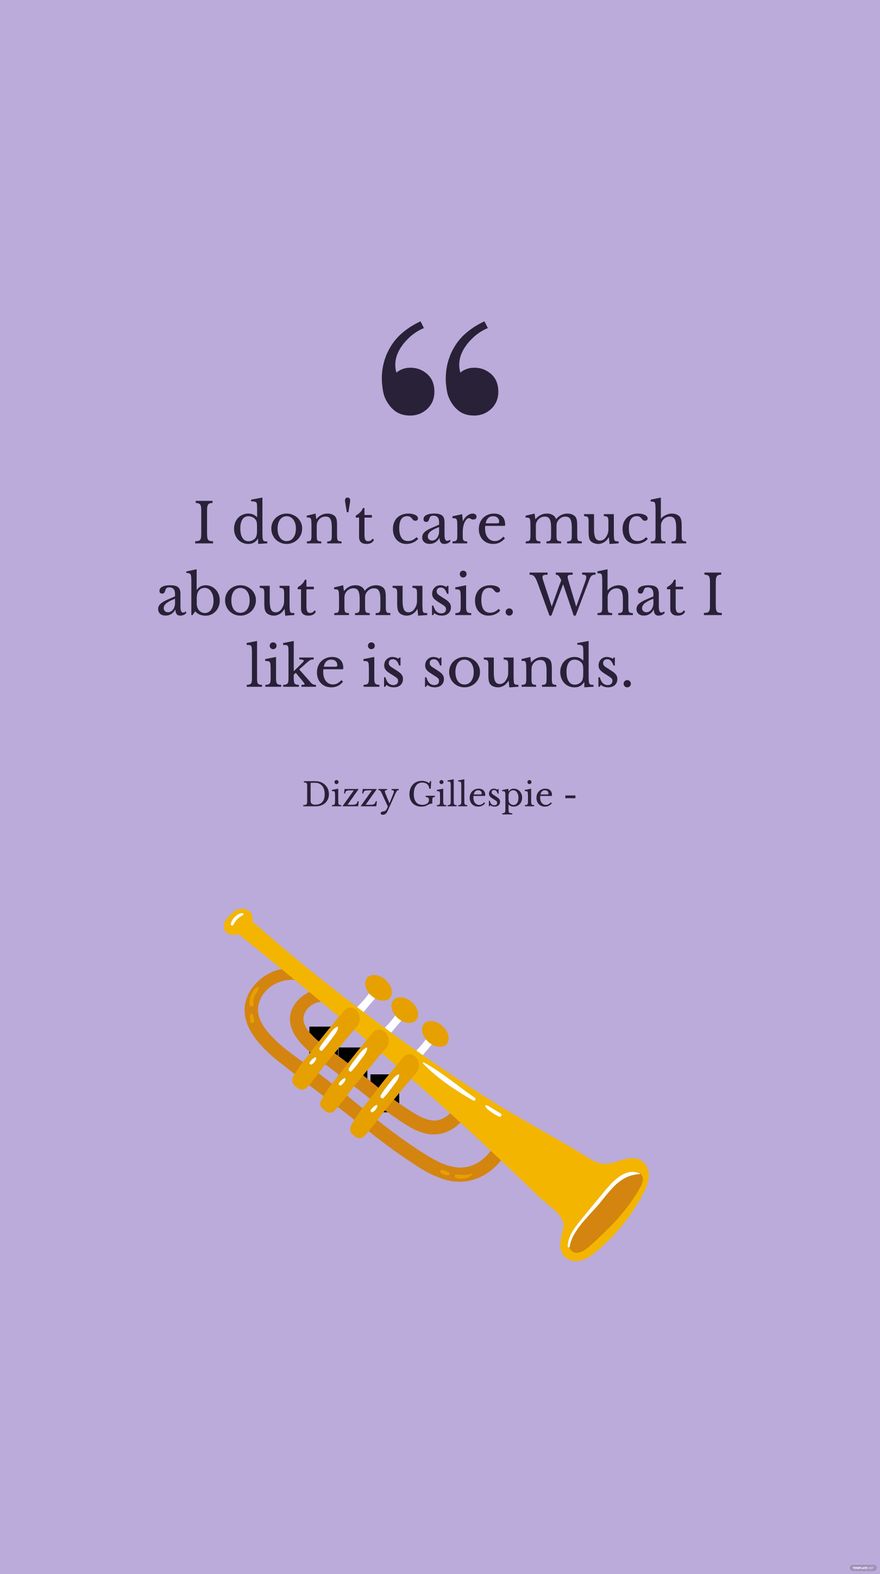 Dizzy Gillespie - I don't care much about music. What I like is sounds. in JPG